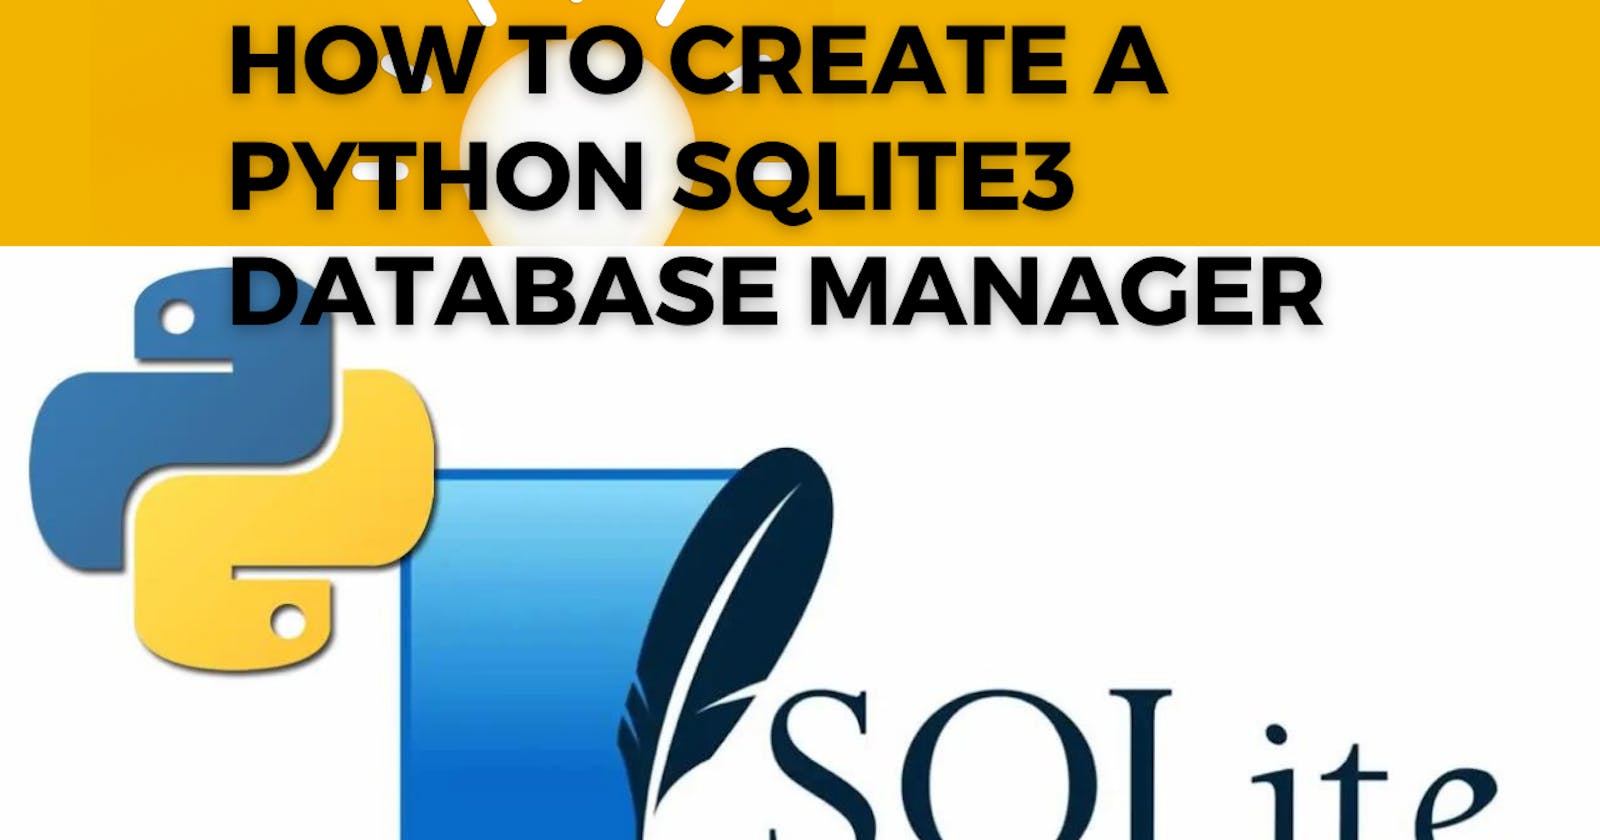 How to create a Python sqlite3 database manager